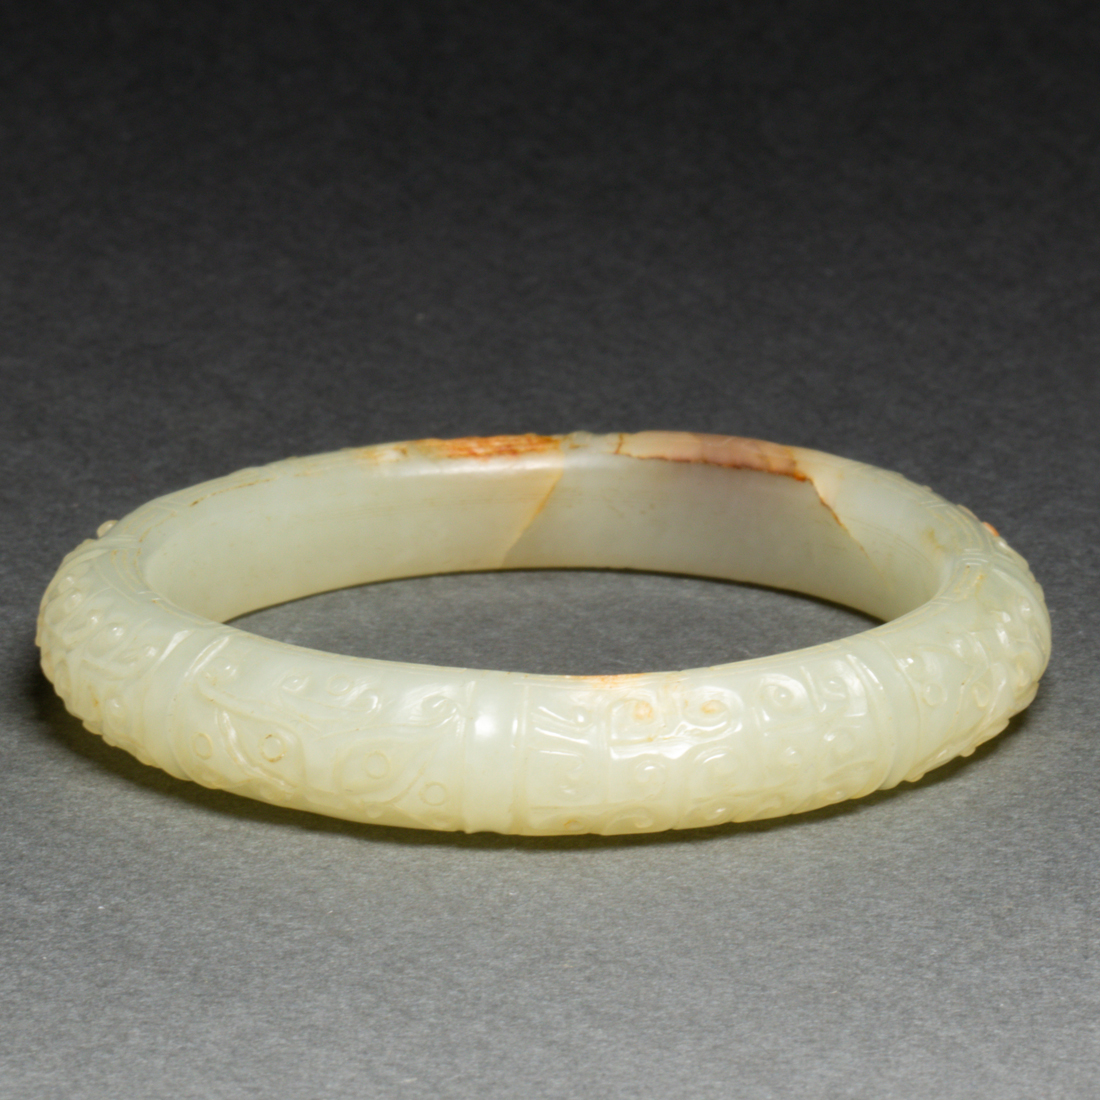 CHINESE CELADON RUSSET JADE BANGLE 3a2dcf